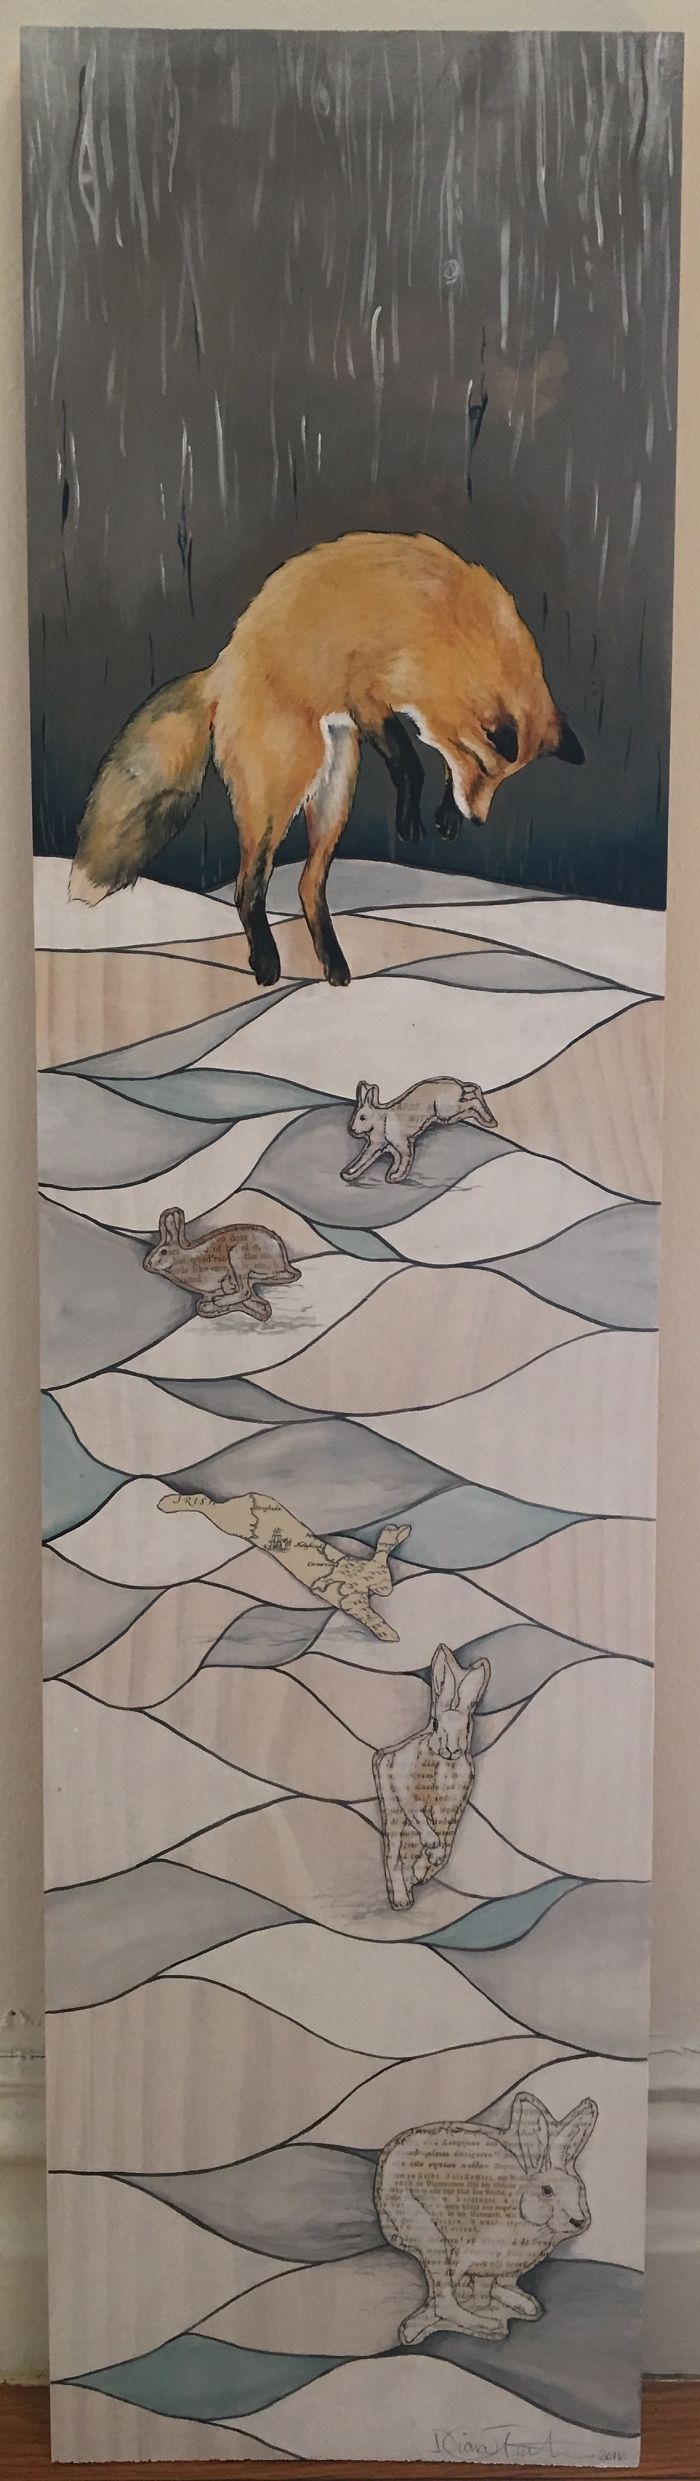 I Painted A Painting Series Of Four Seasons Devoted To The Playful Fox